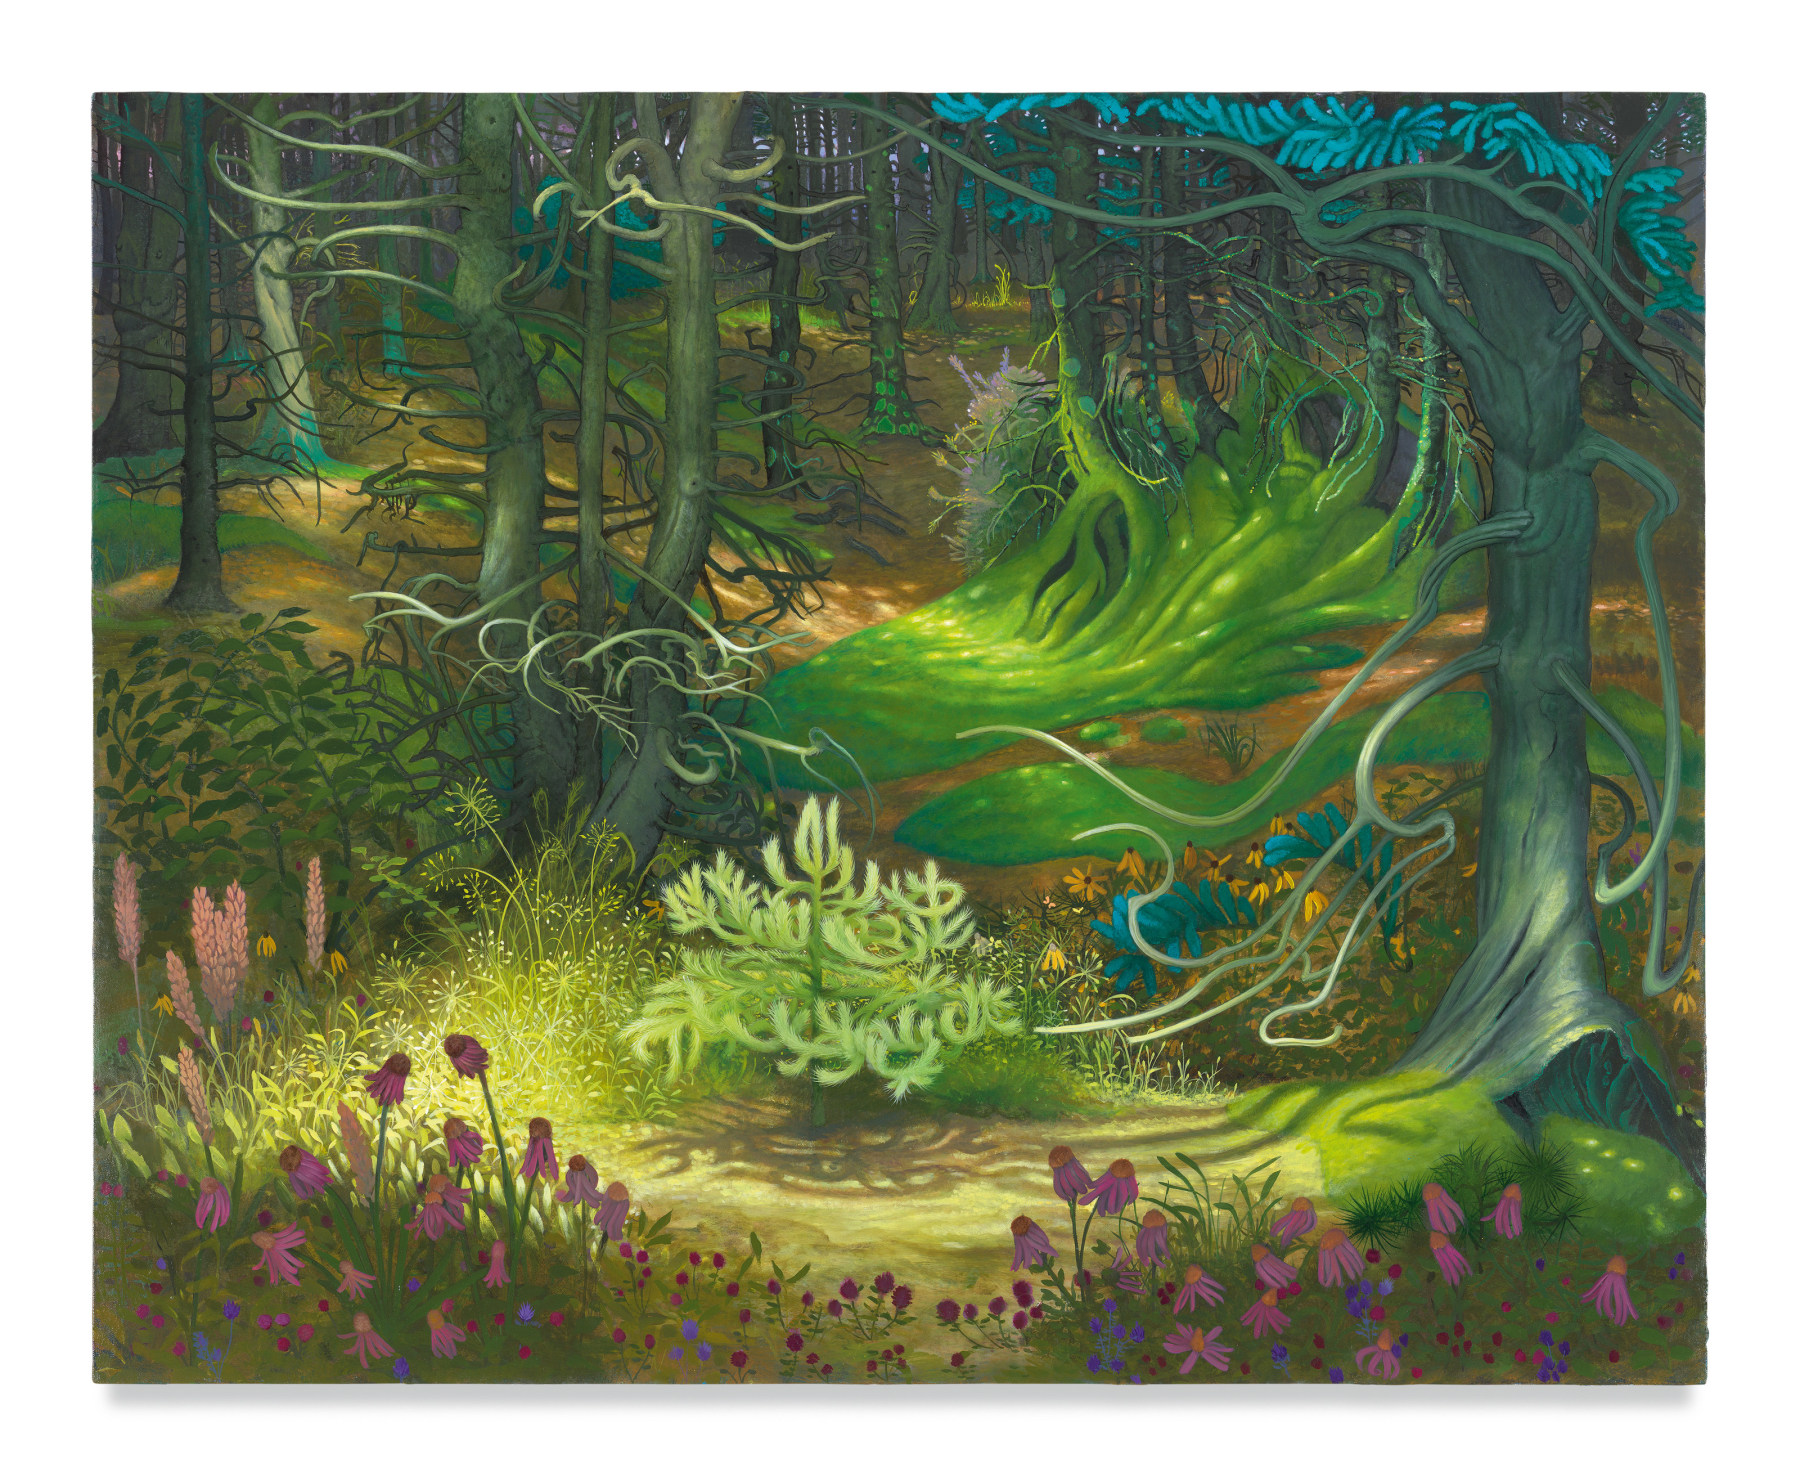 This is a painting of a dense surrealist forest. The artwork depicts lush green foliage and various plants.